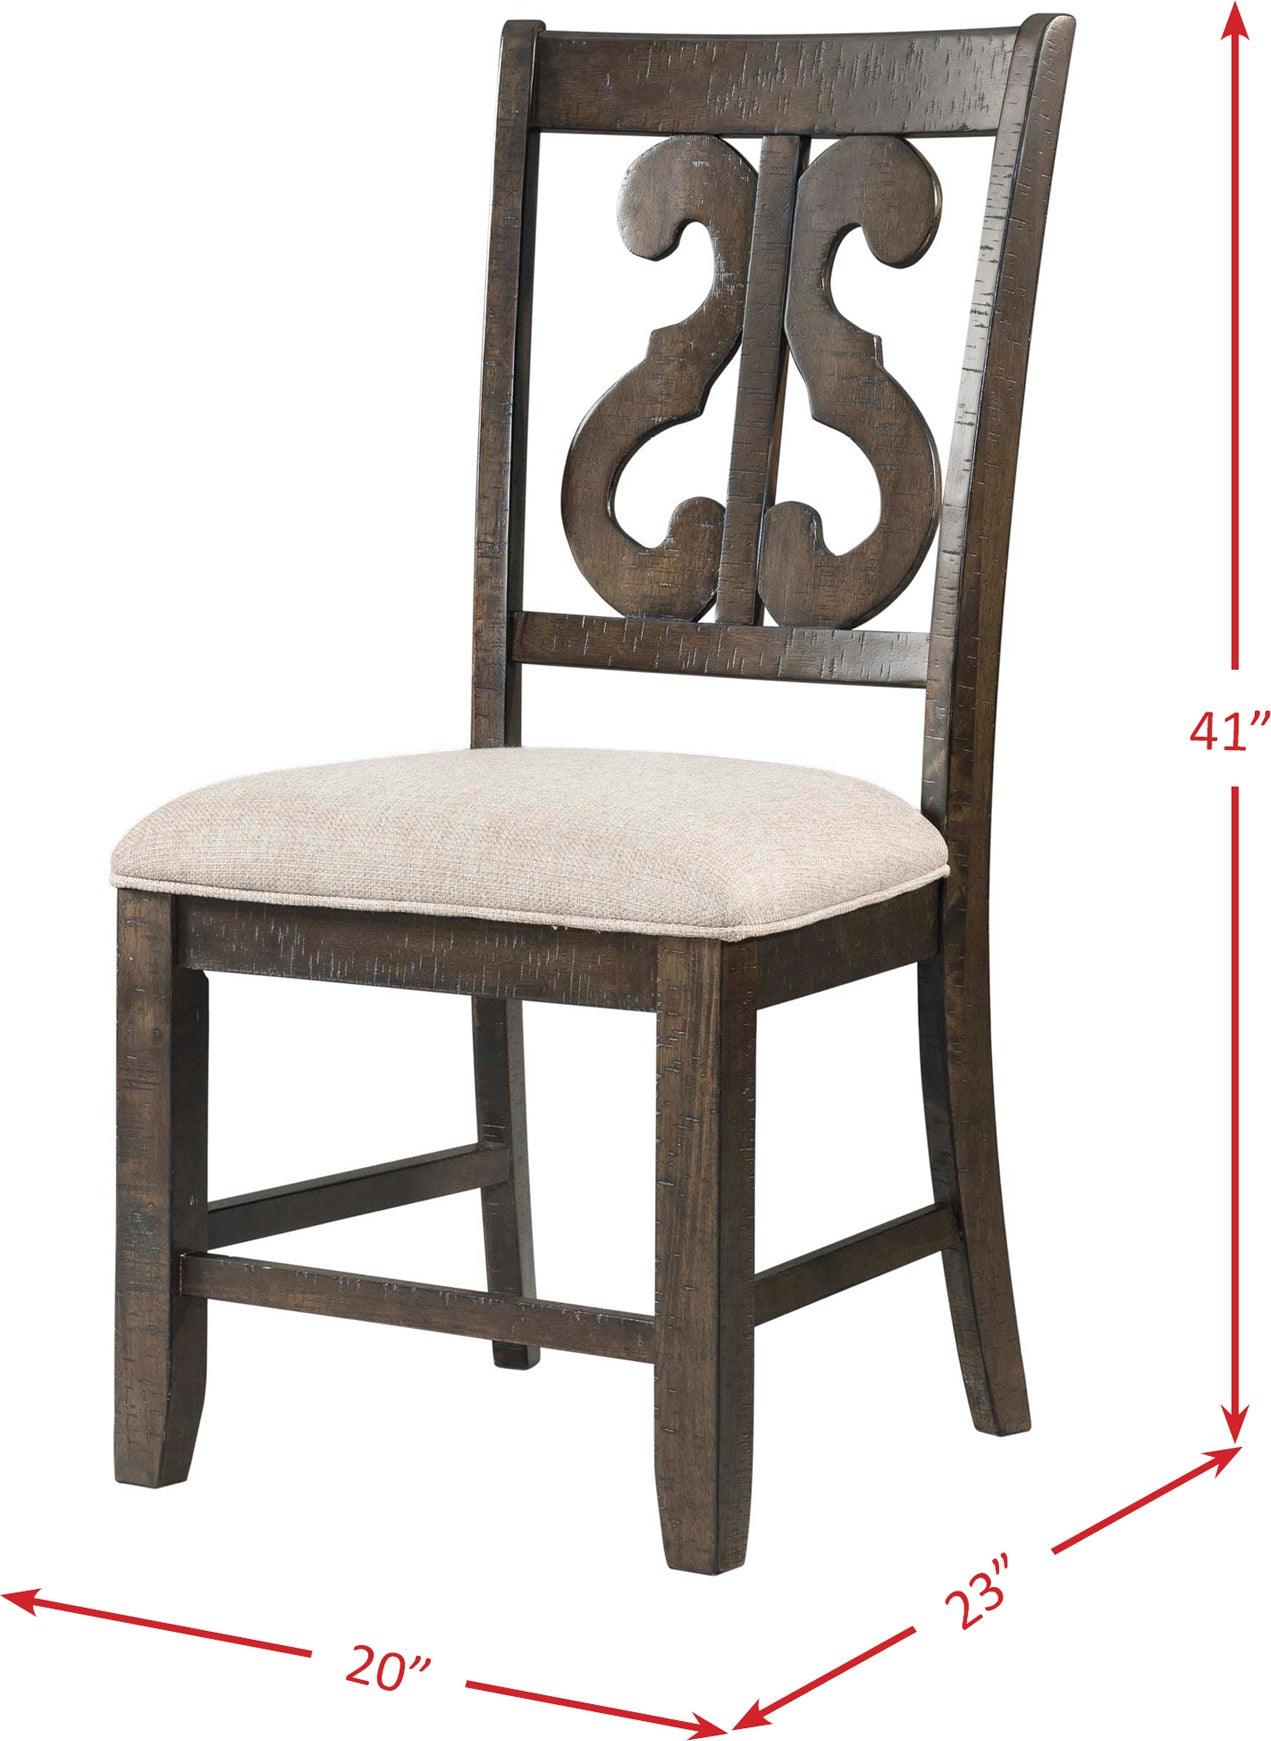 Elements Dining Chairs - Stanford Wooden Swirl Back Side Chair Smokey Walnut (Set of 2)